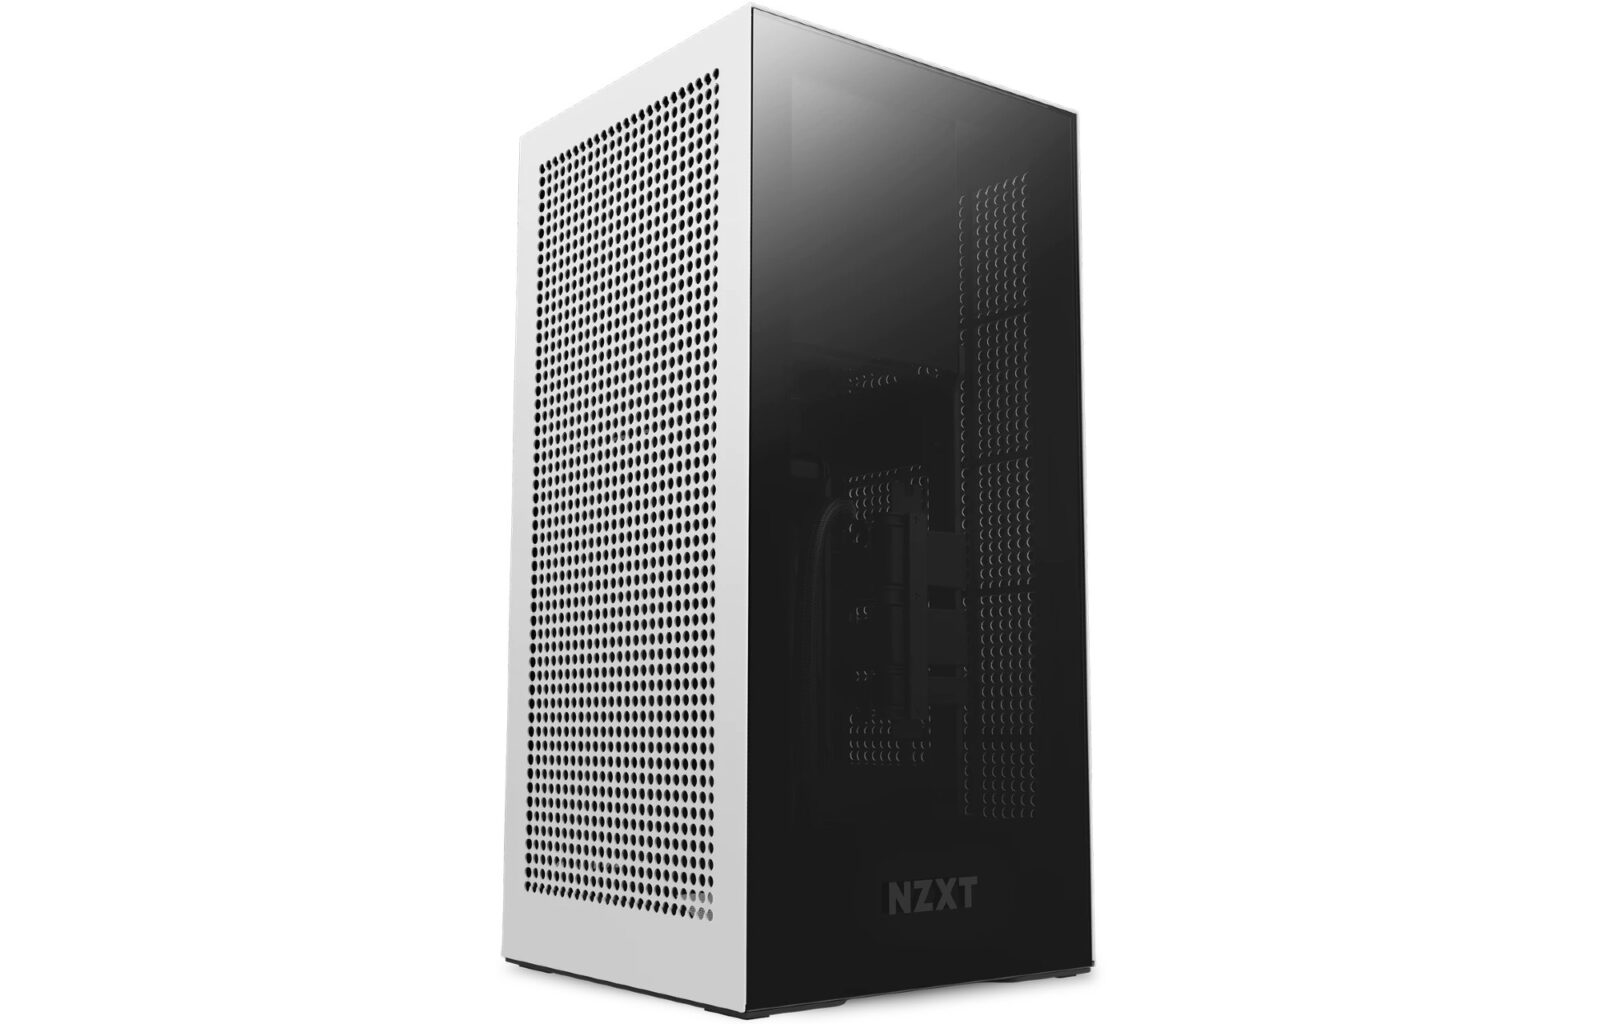 NZXT_h1